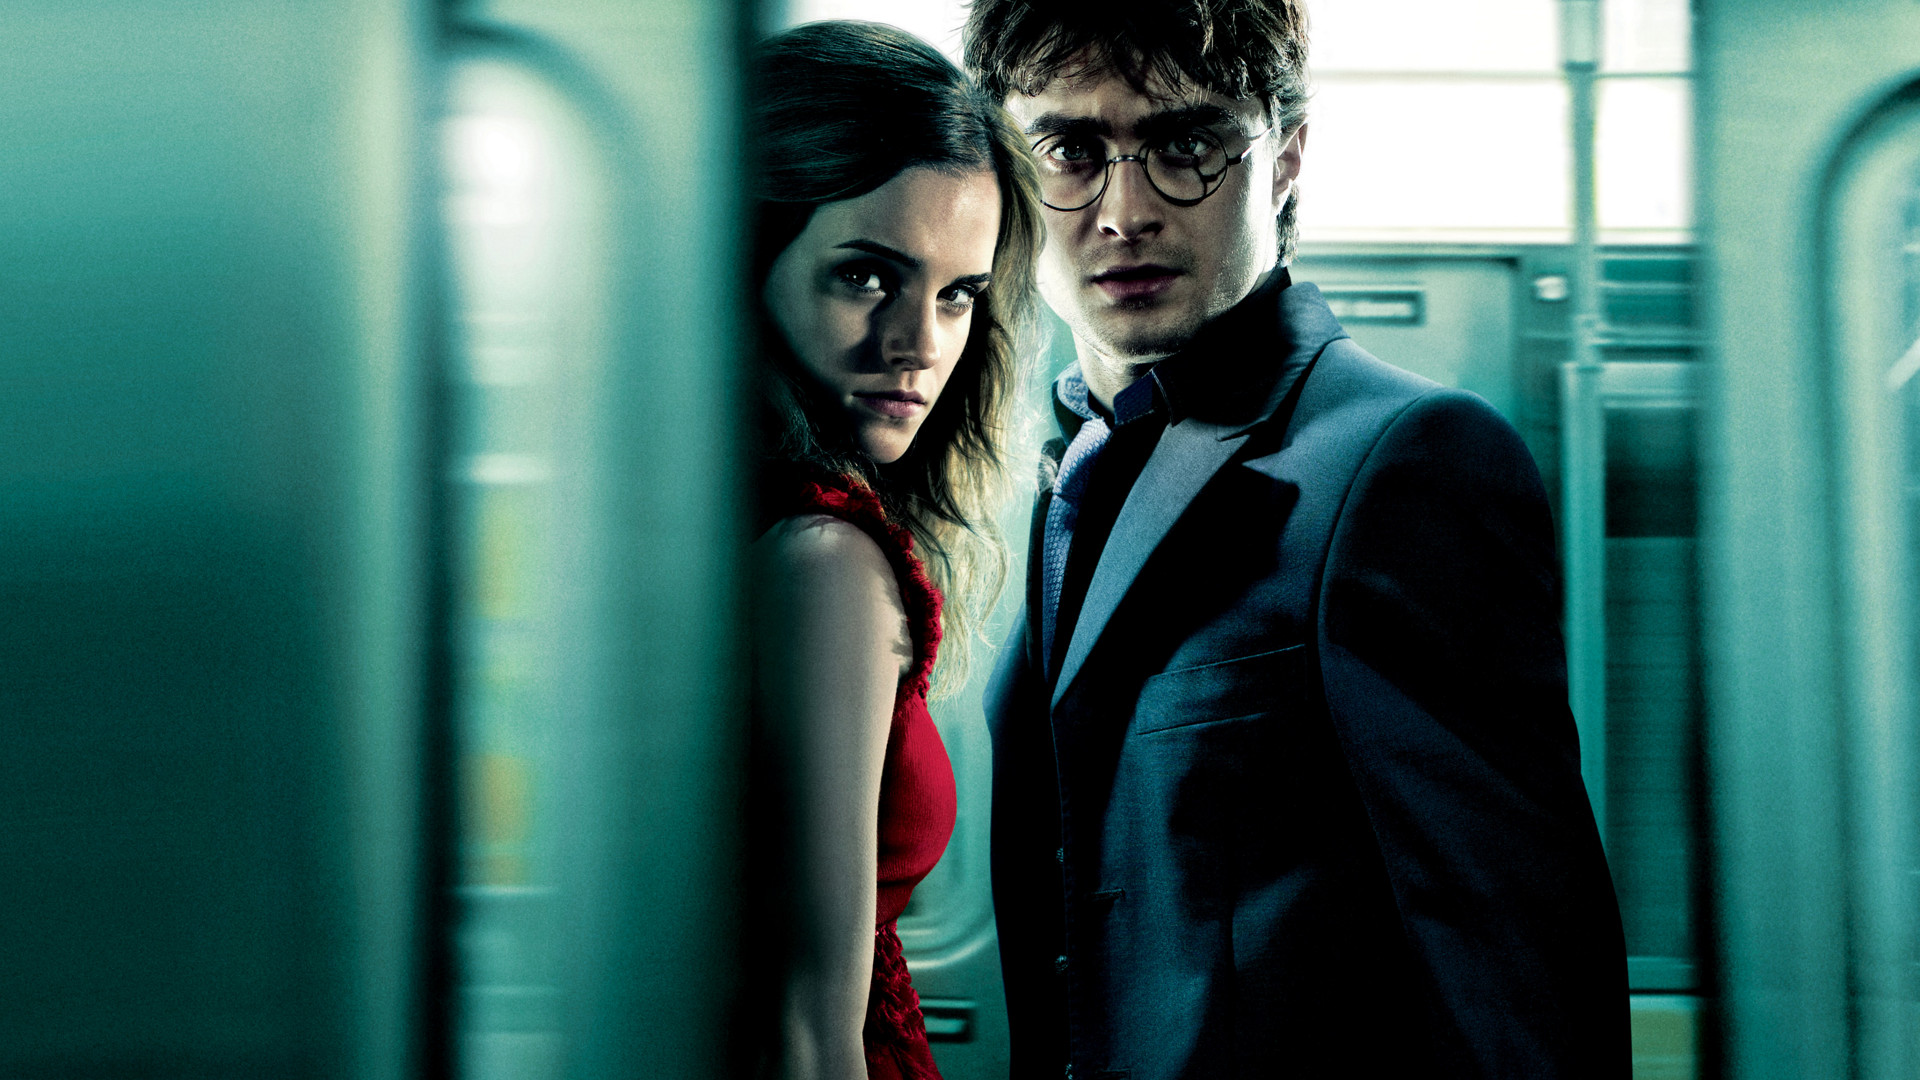 harry potter, hermione granger, movie, harry potter and the deathly hallows: part 1, daniel radcliffe, emma watson